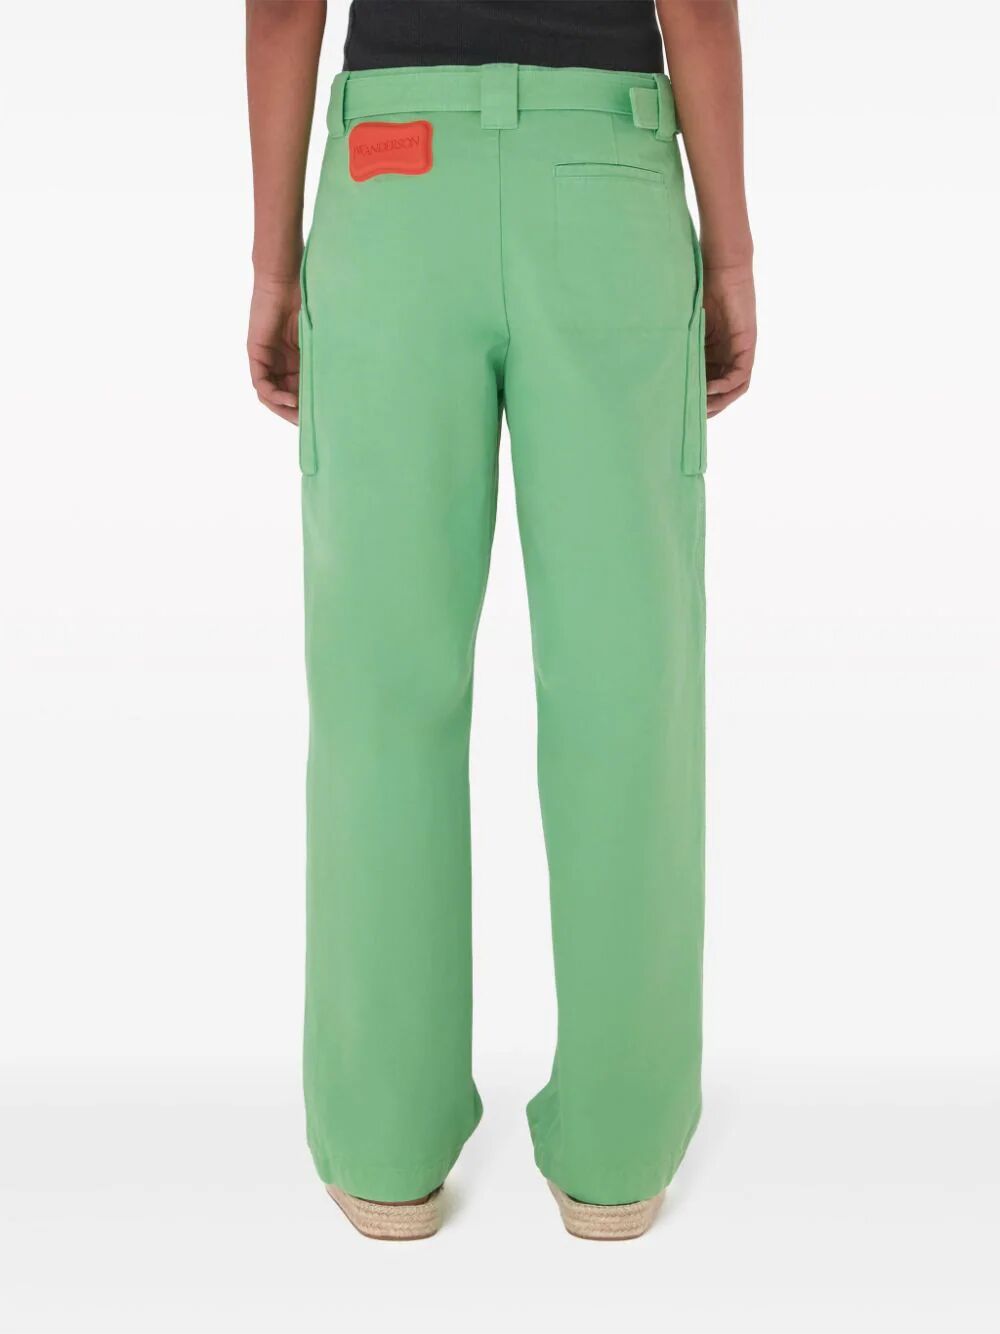 JW ANDERSON-GARMENT DYED CARGO TROUSERS-TR0357 PG1476 524